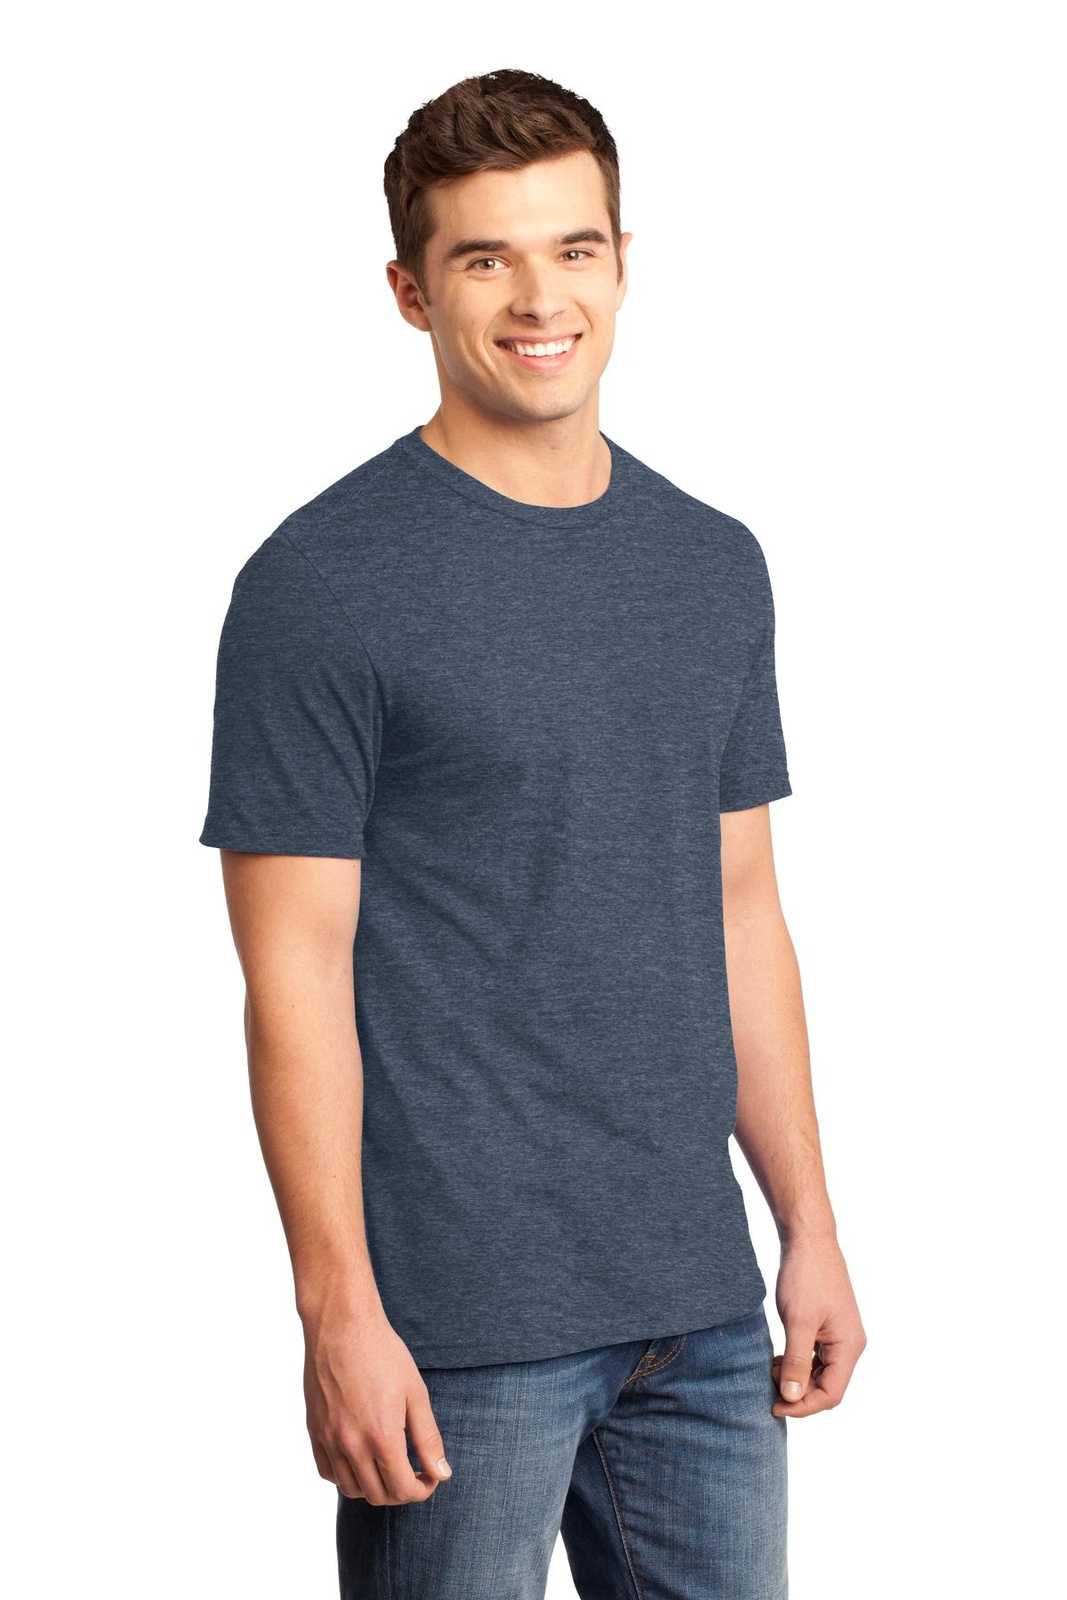 District DT6000 Very Important Tee - Heathered Navy - HIT a Double - 4